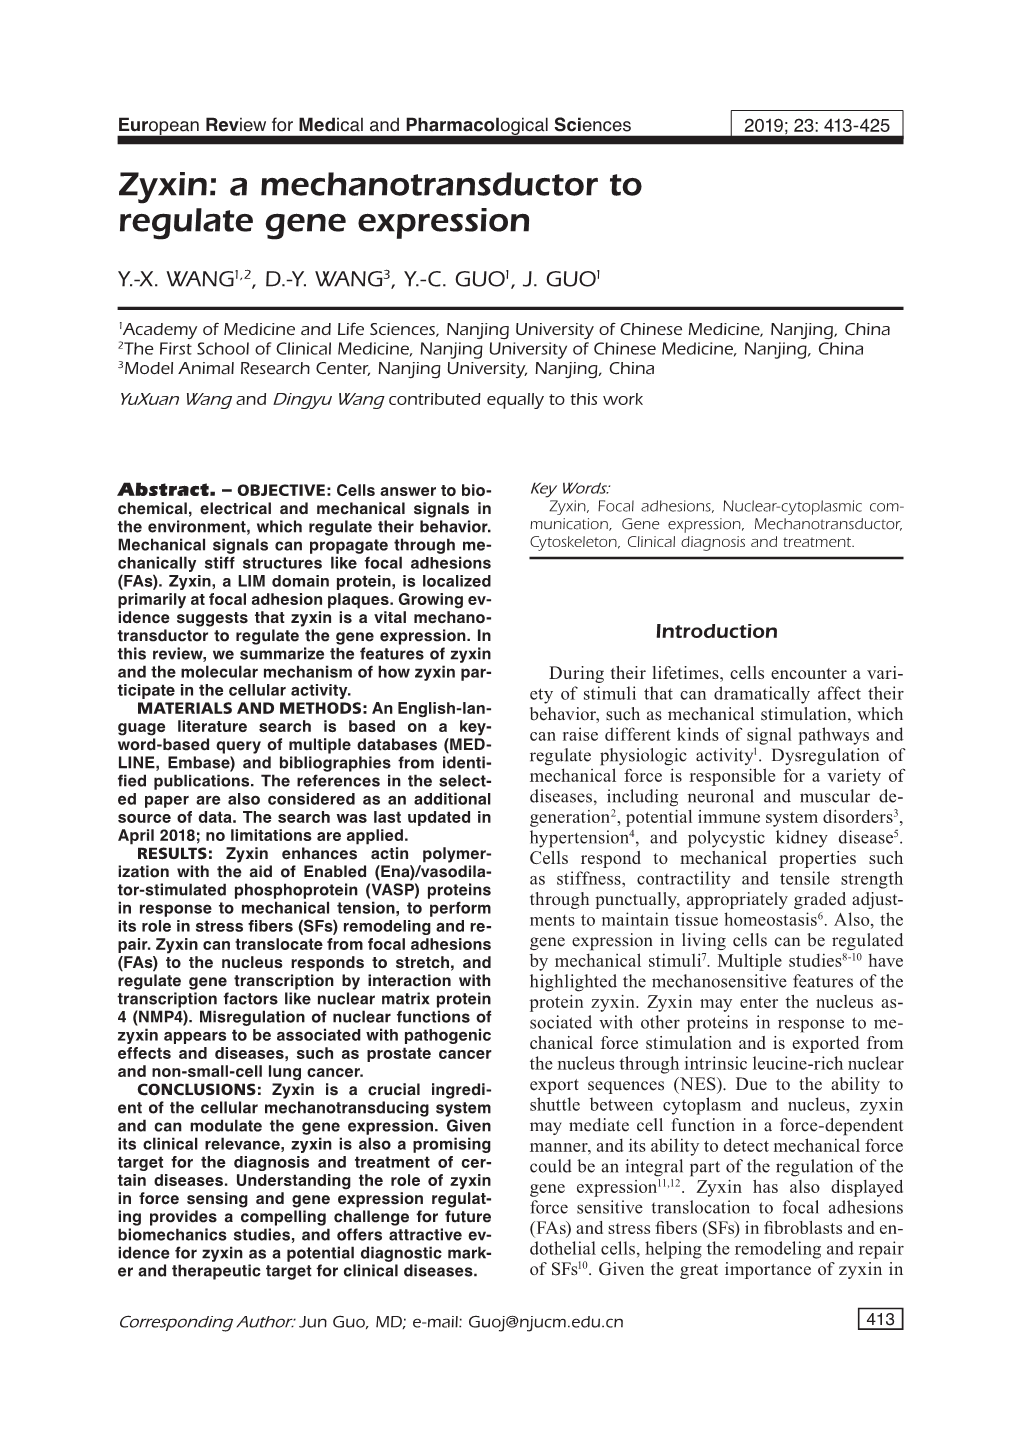 Zyxin: a Mechanotransductor to Regulate Gene Expression